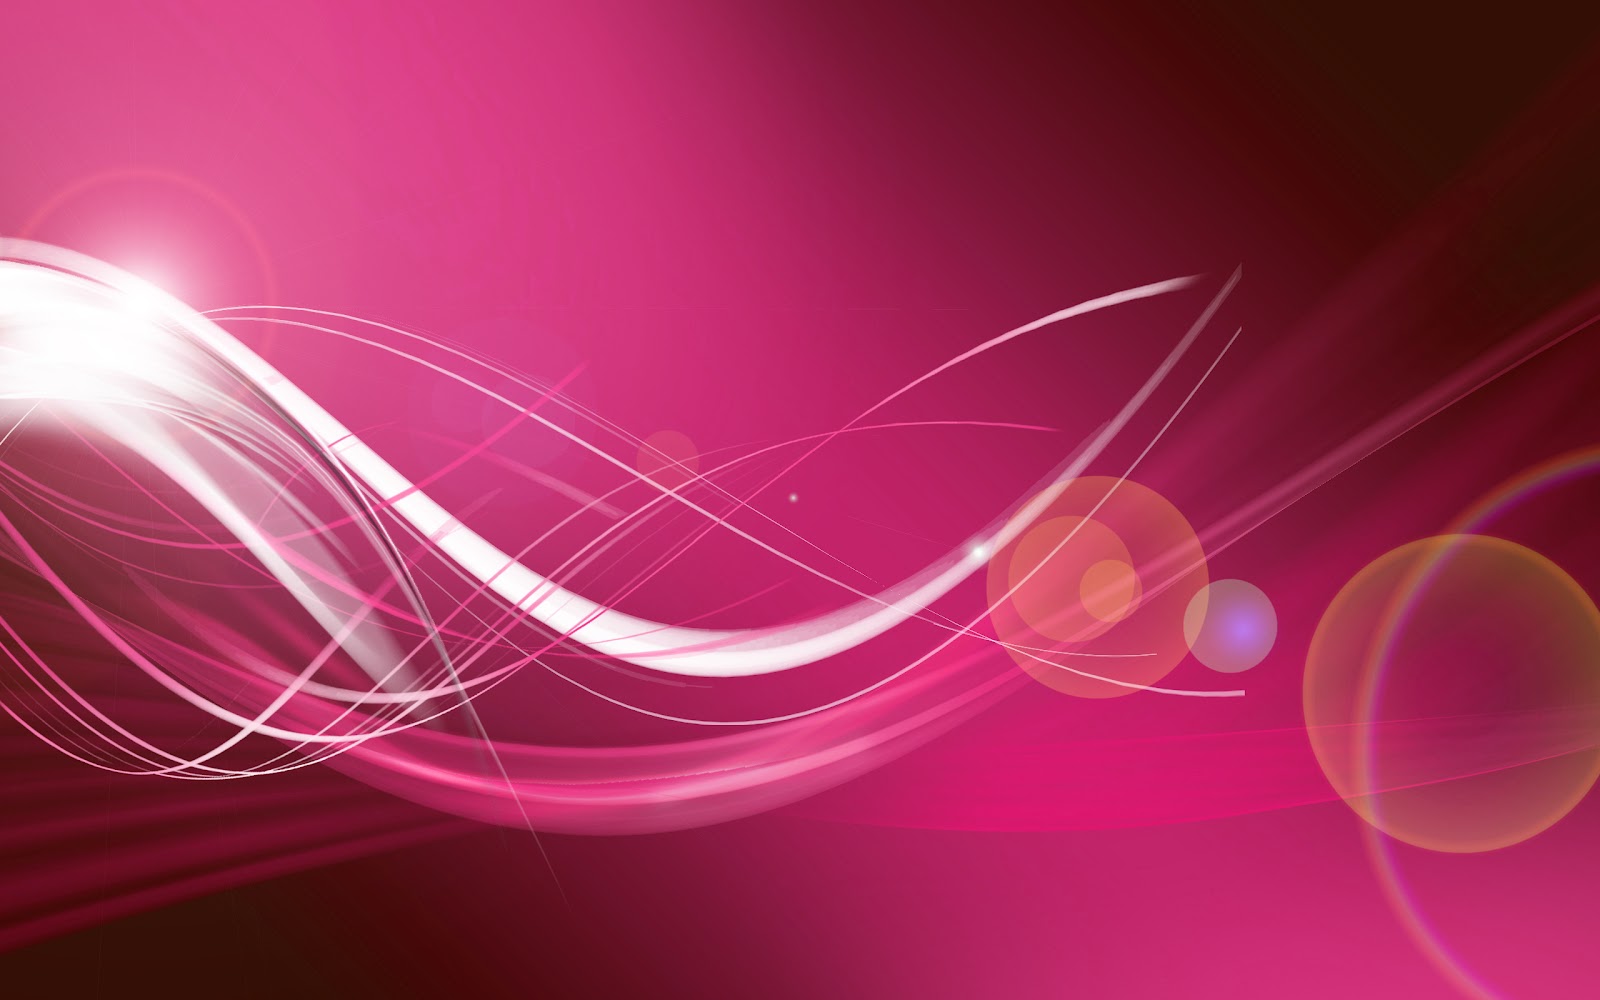  pink background wallpaper Home of Wallpapers download hd 1600x1000